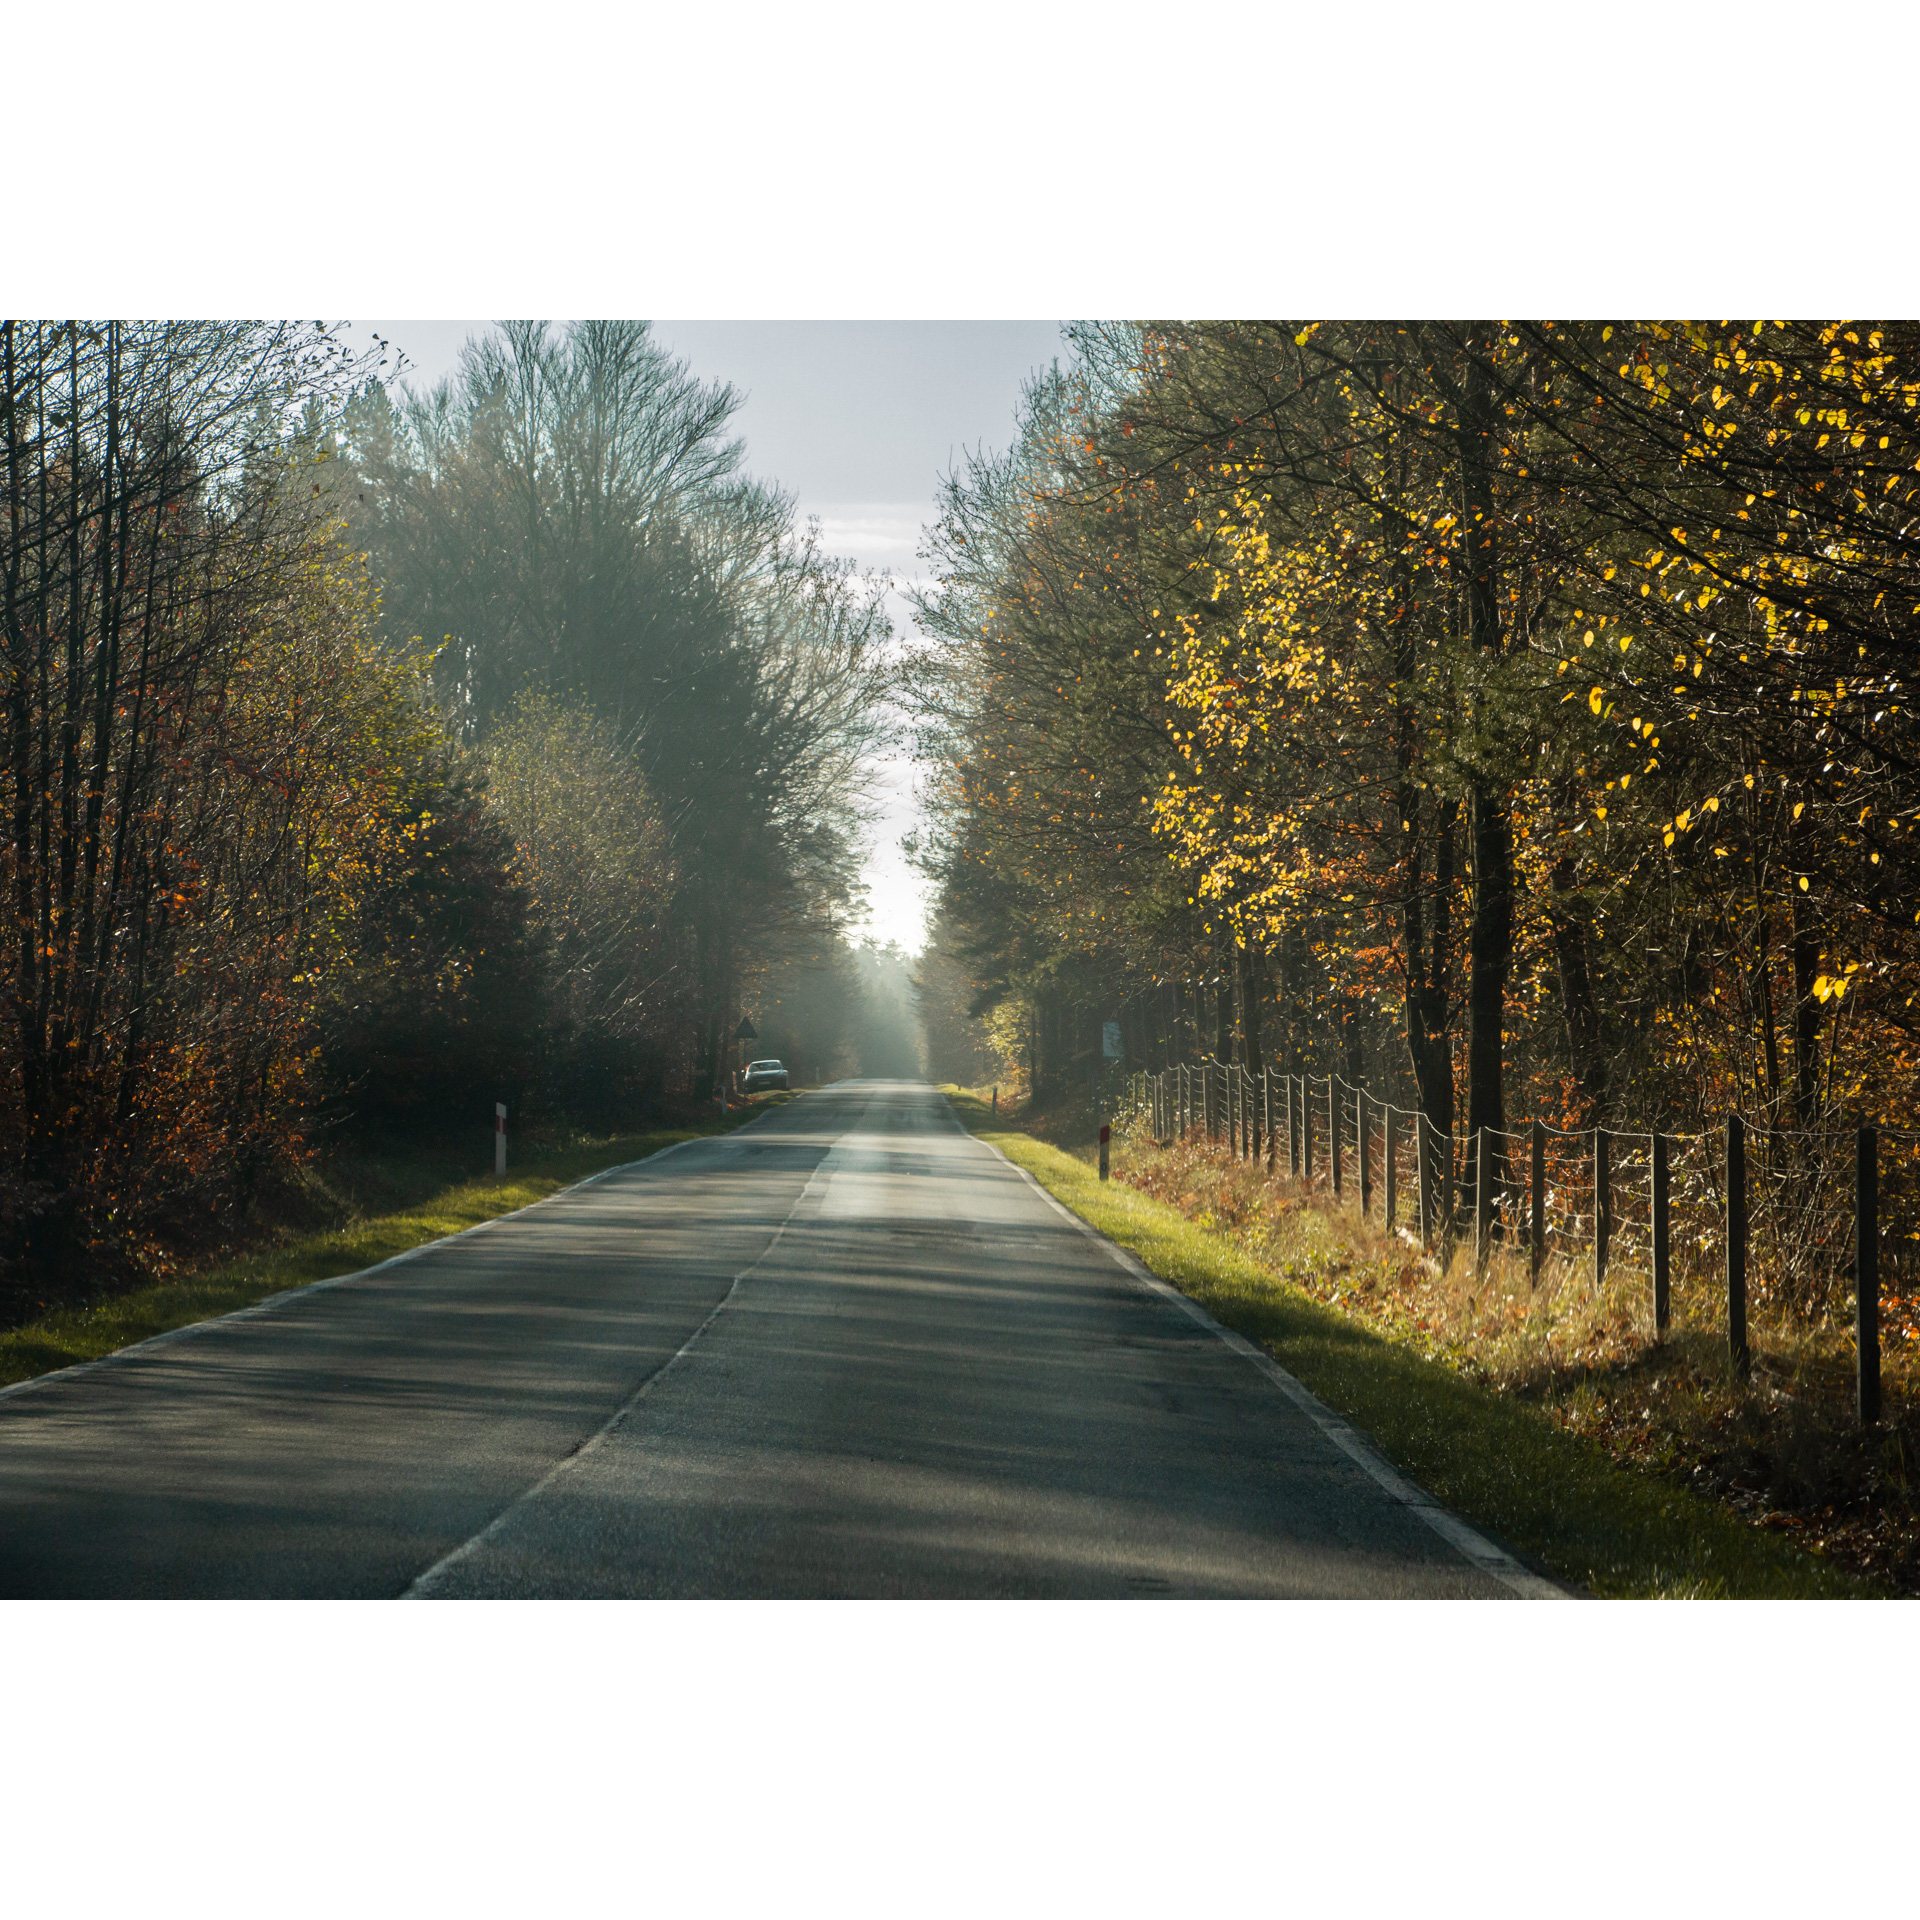 An asphalt road among trees with yellow leaves running along a low fence, in the background a car on the roadside